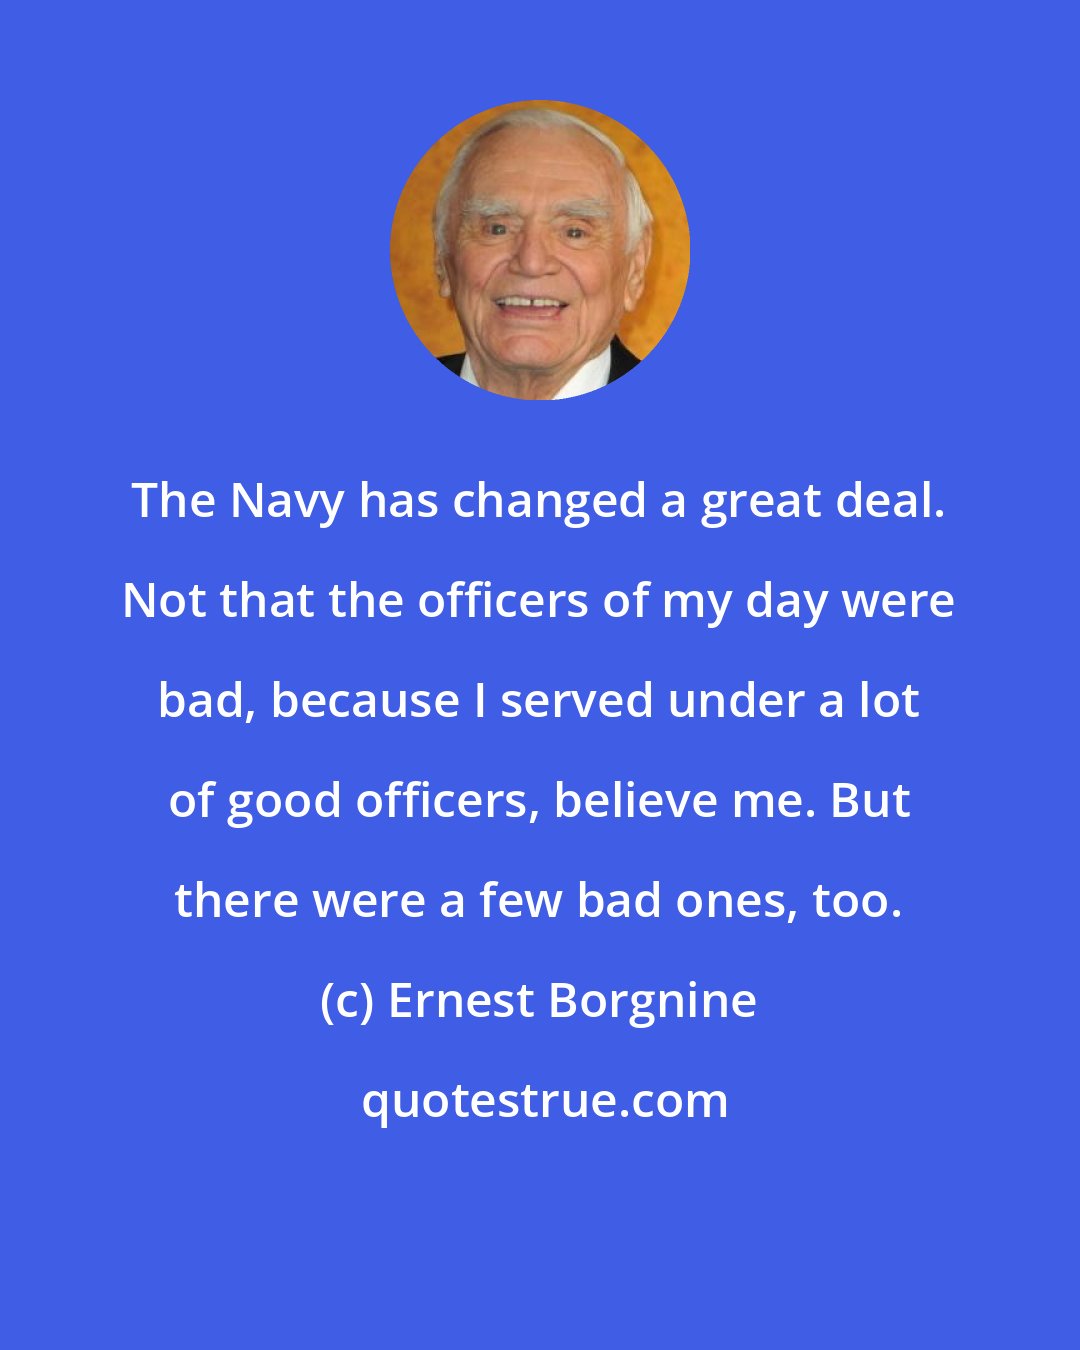 Ernest Borgnine: The Navy has changed a great deal. Not that the officers of my day were bad, because I served under a lot of good officers, believe me. But there were a few bad ones, too.